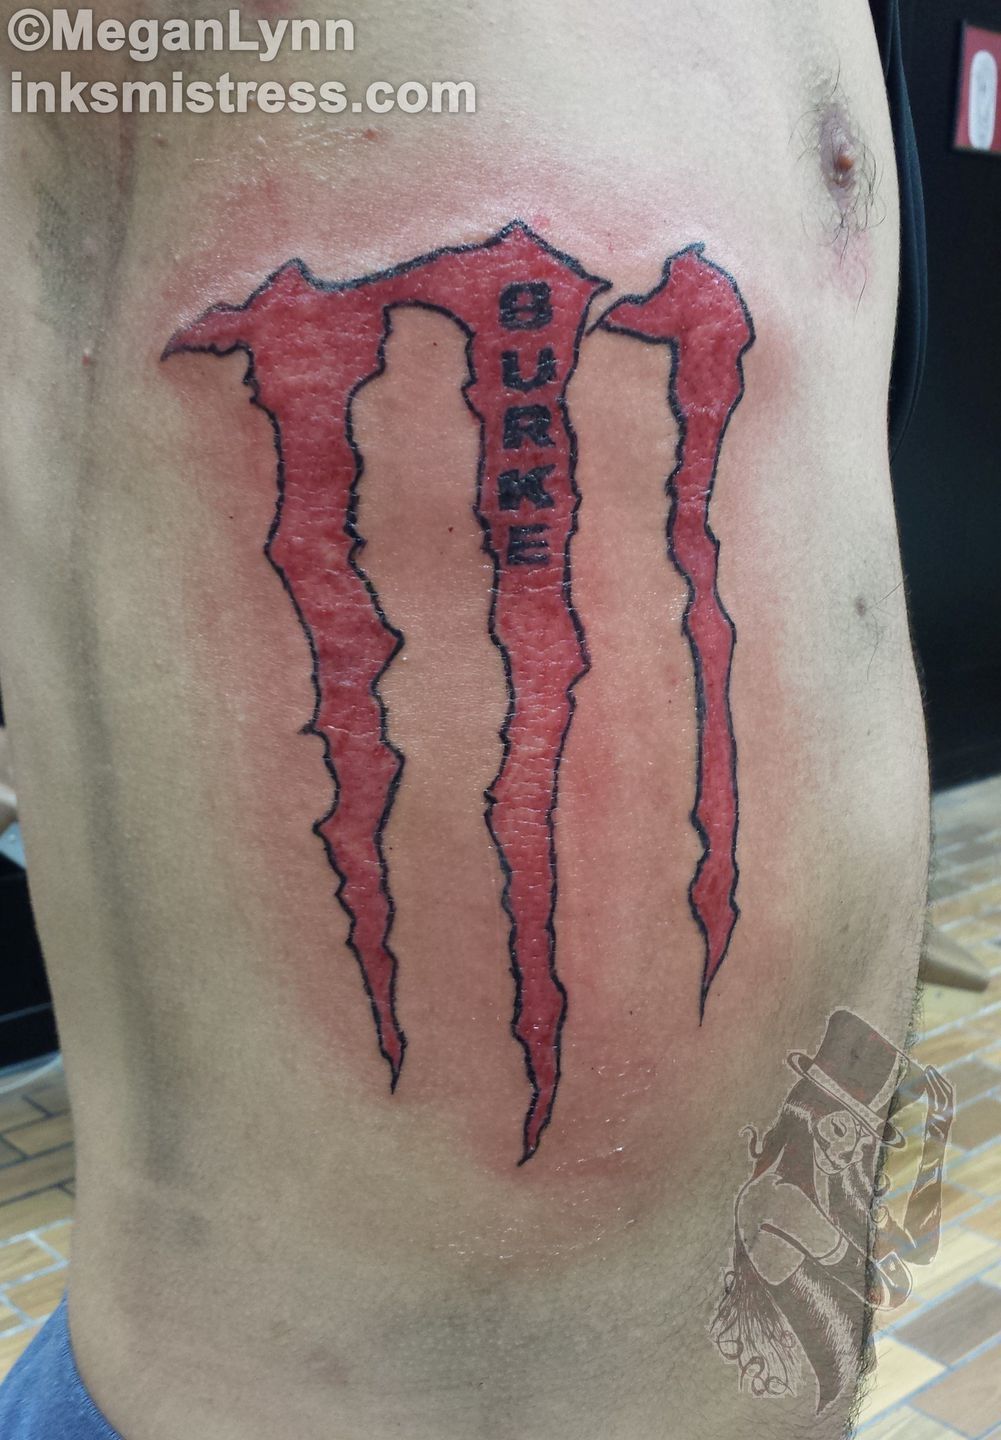 ihatemilk3000 on X Good lord I just saw a 6 forearm monster energy  tattoo out in the wild  I thought they only existed on the internet  httpstcoKQQEtqxH1P  X